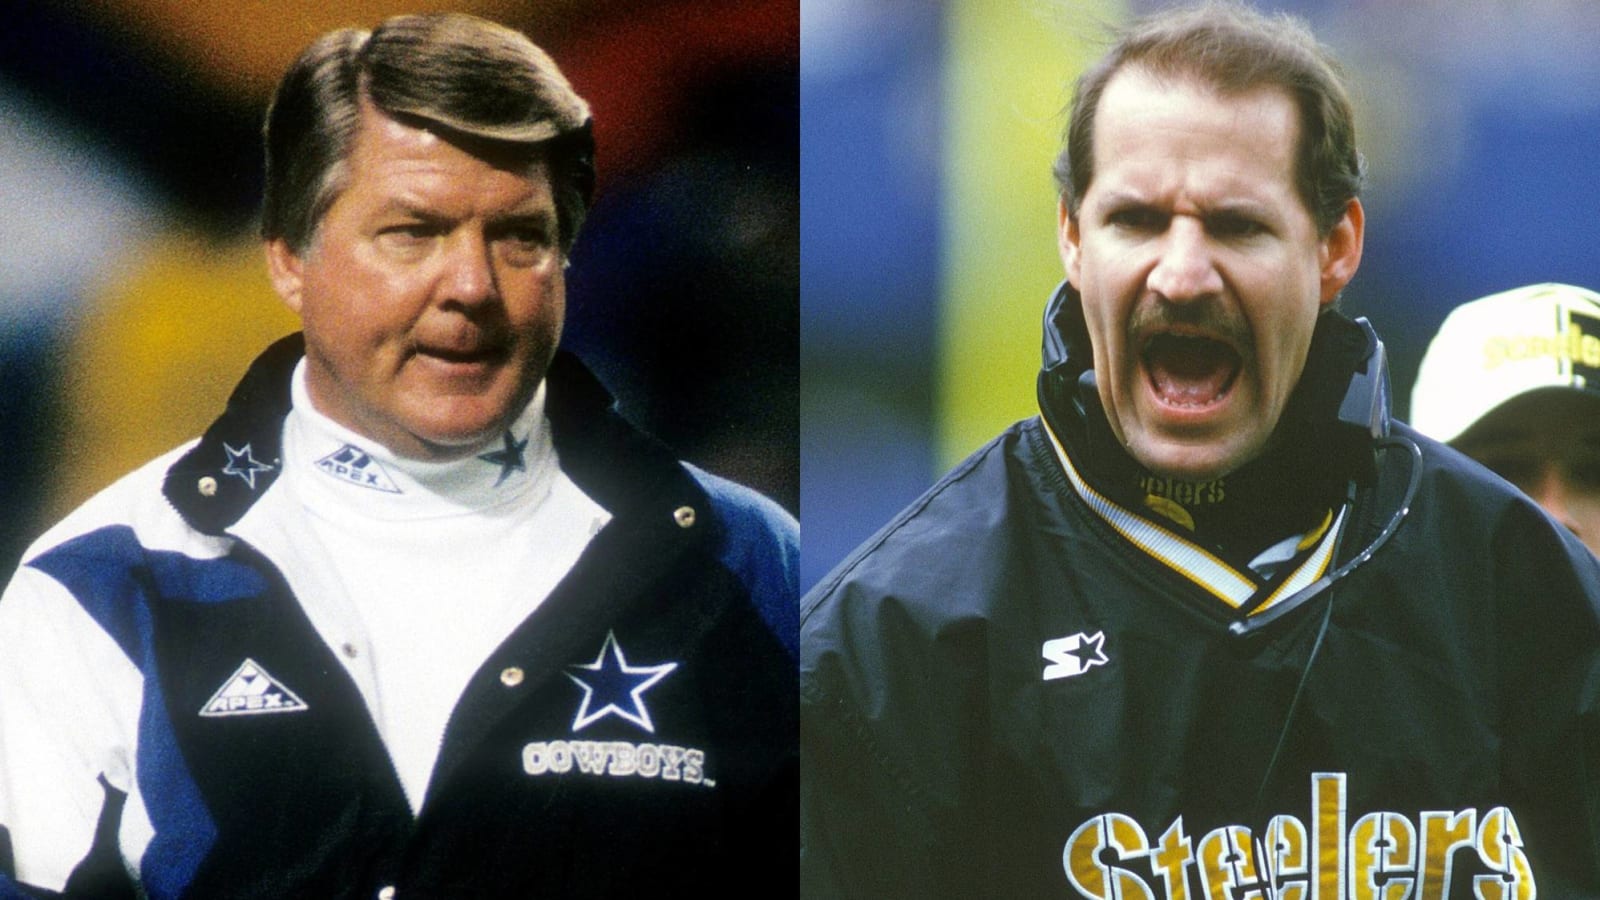 Are Jimmy Johnson, Bill Cowher Hall of Fame worthy?